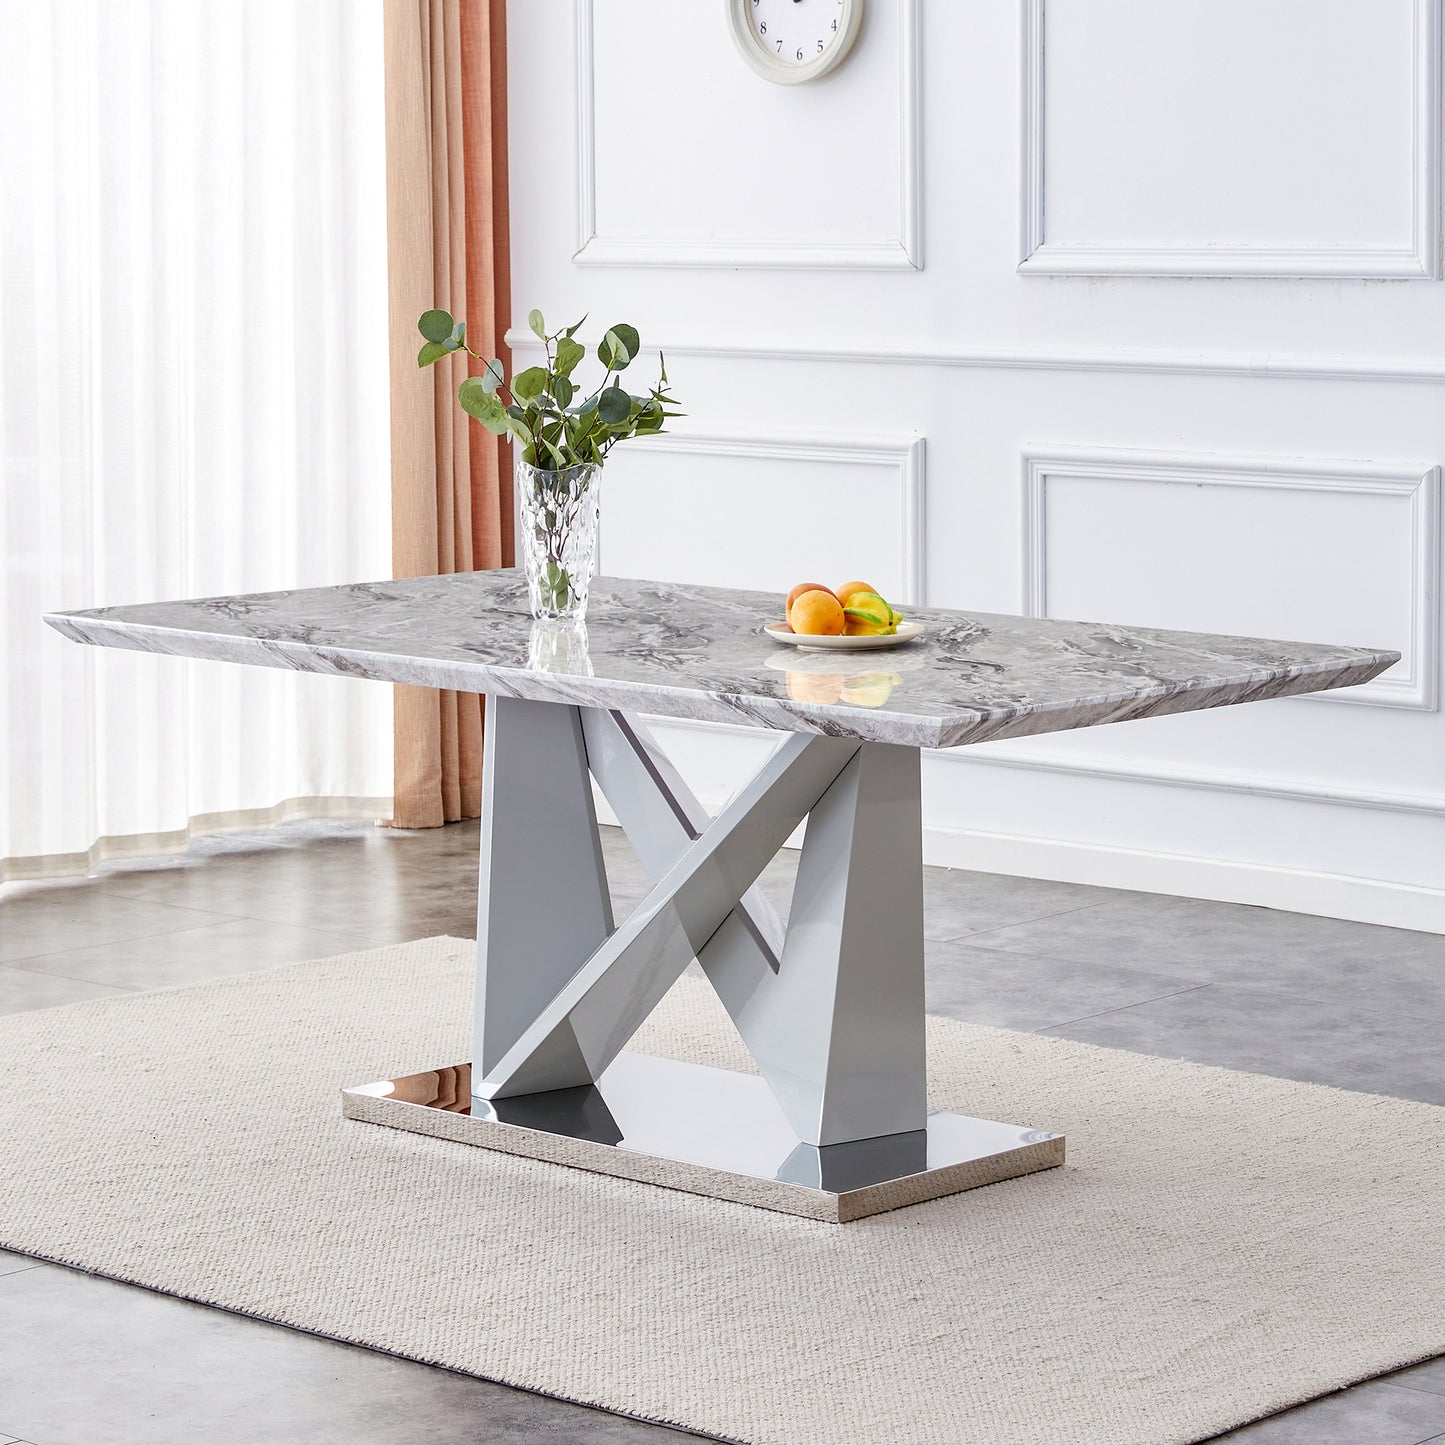 mdf faux marble dining table with white double v-shaped support